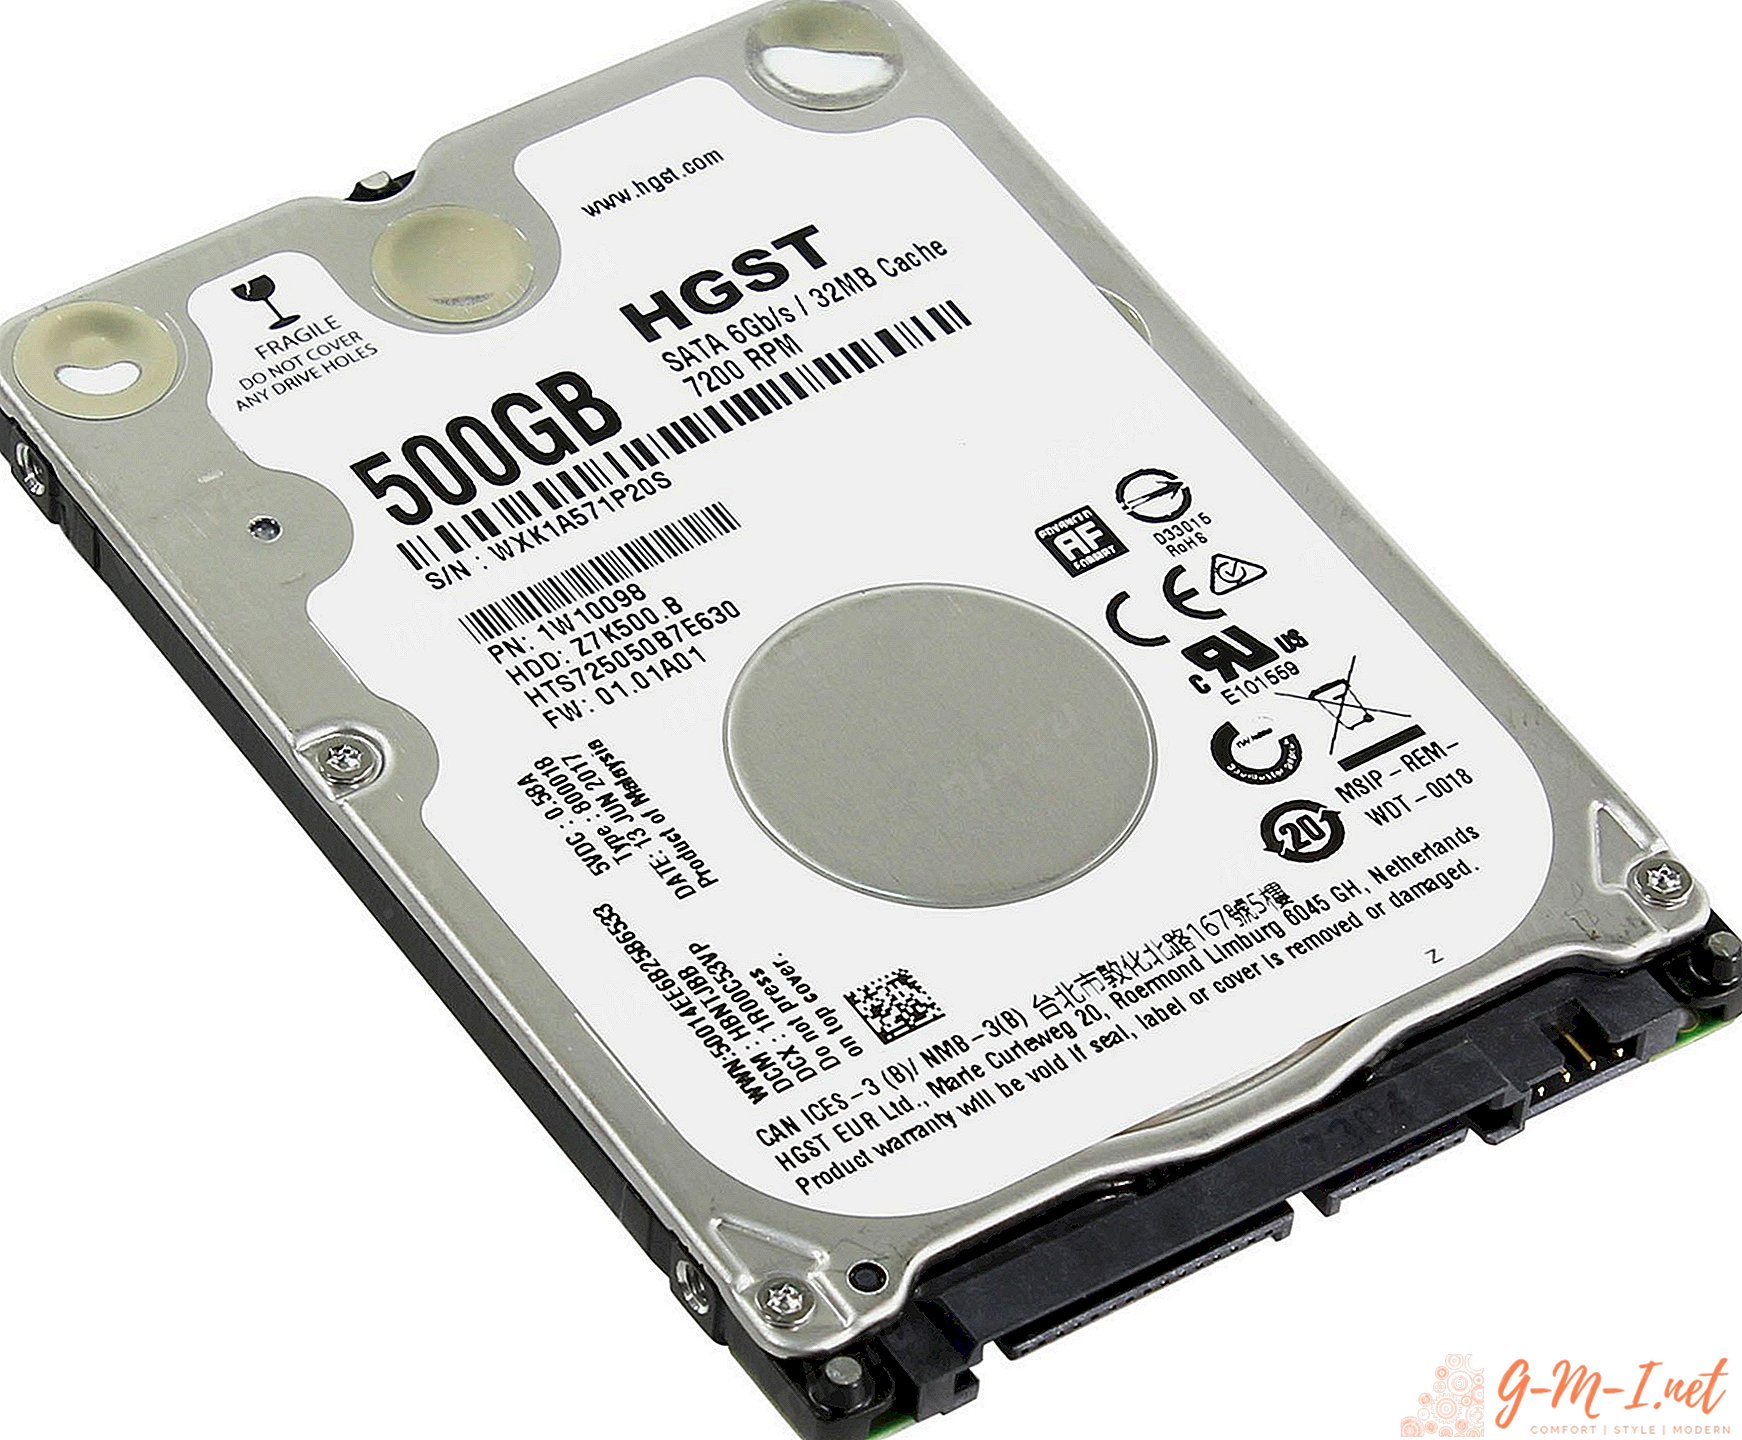 What is the difference between hdd and ssd for a laptop?